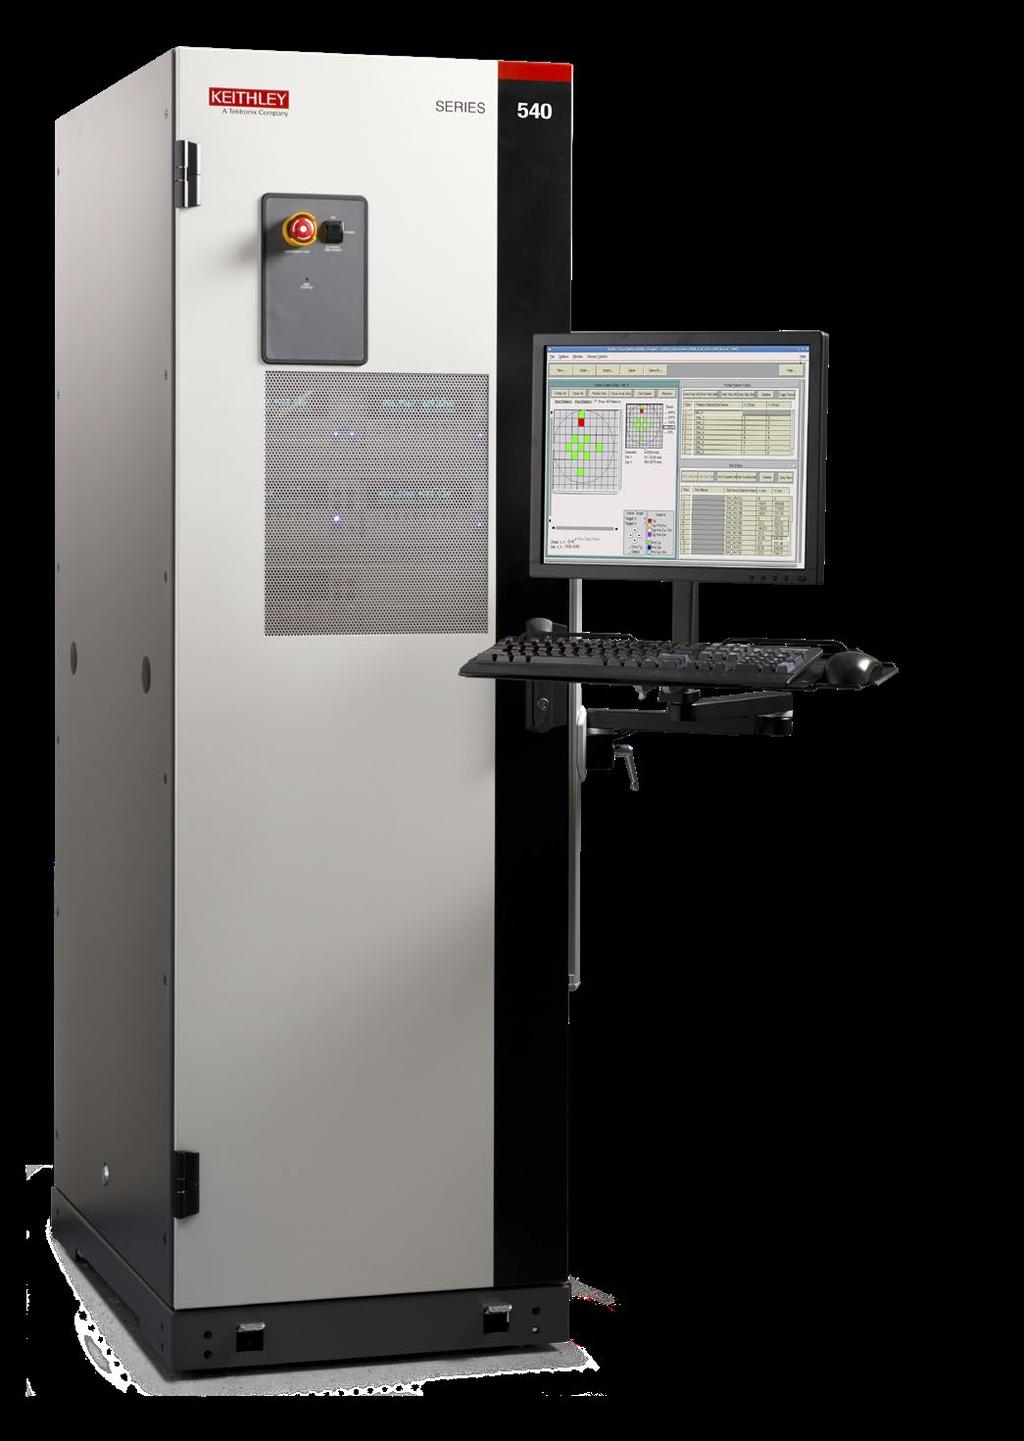 S540 Power Semiconductor Test System Datasheet Key Features Automatically perform all wafer-level parametric tests on up to 48 pins, including high voltage breakdown, capacitance, and low voltage